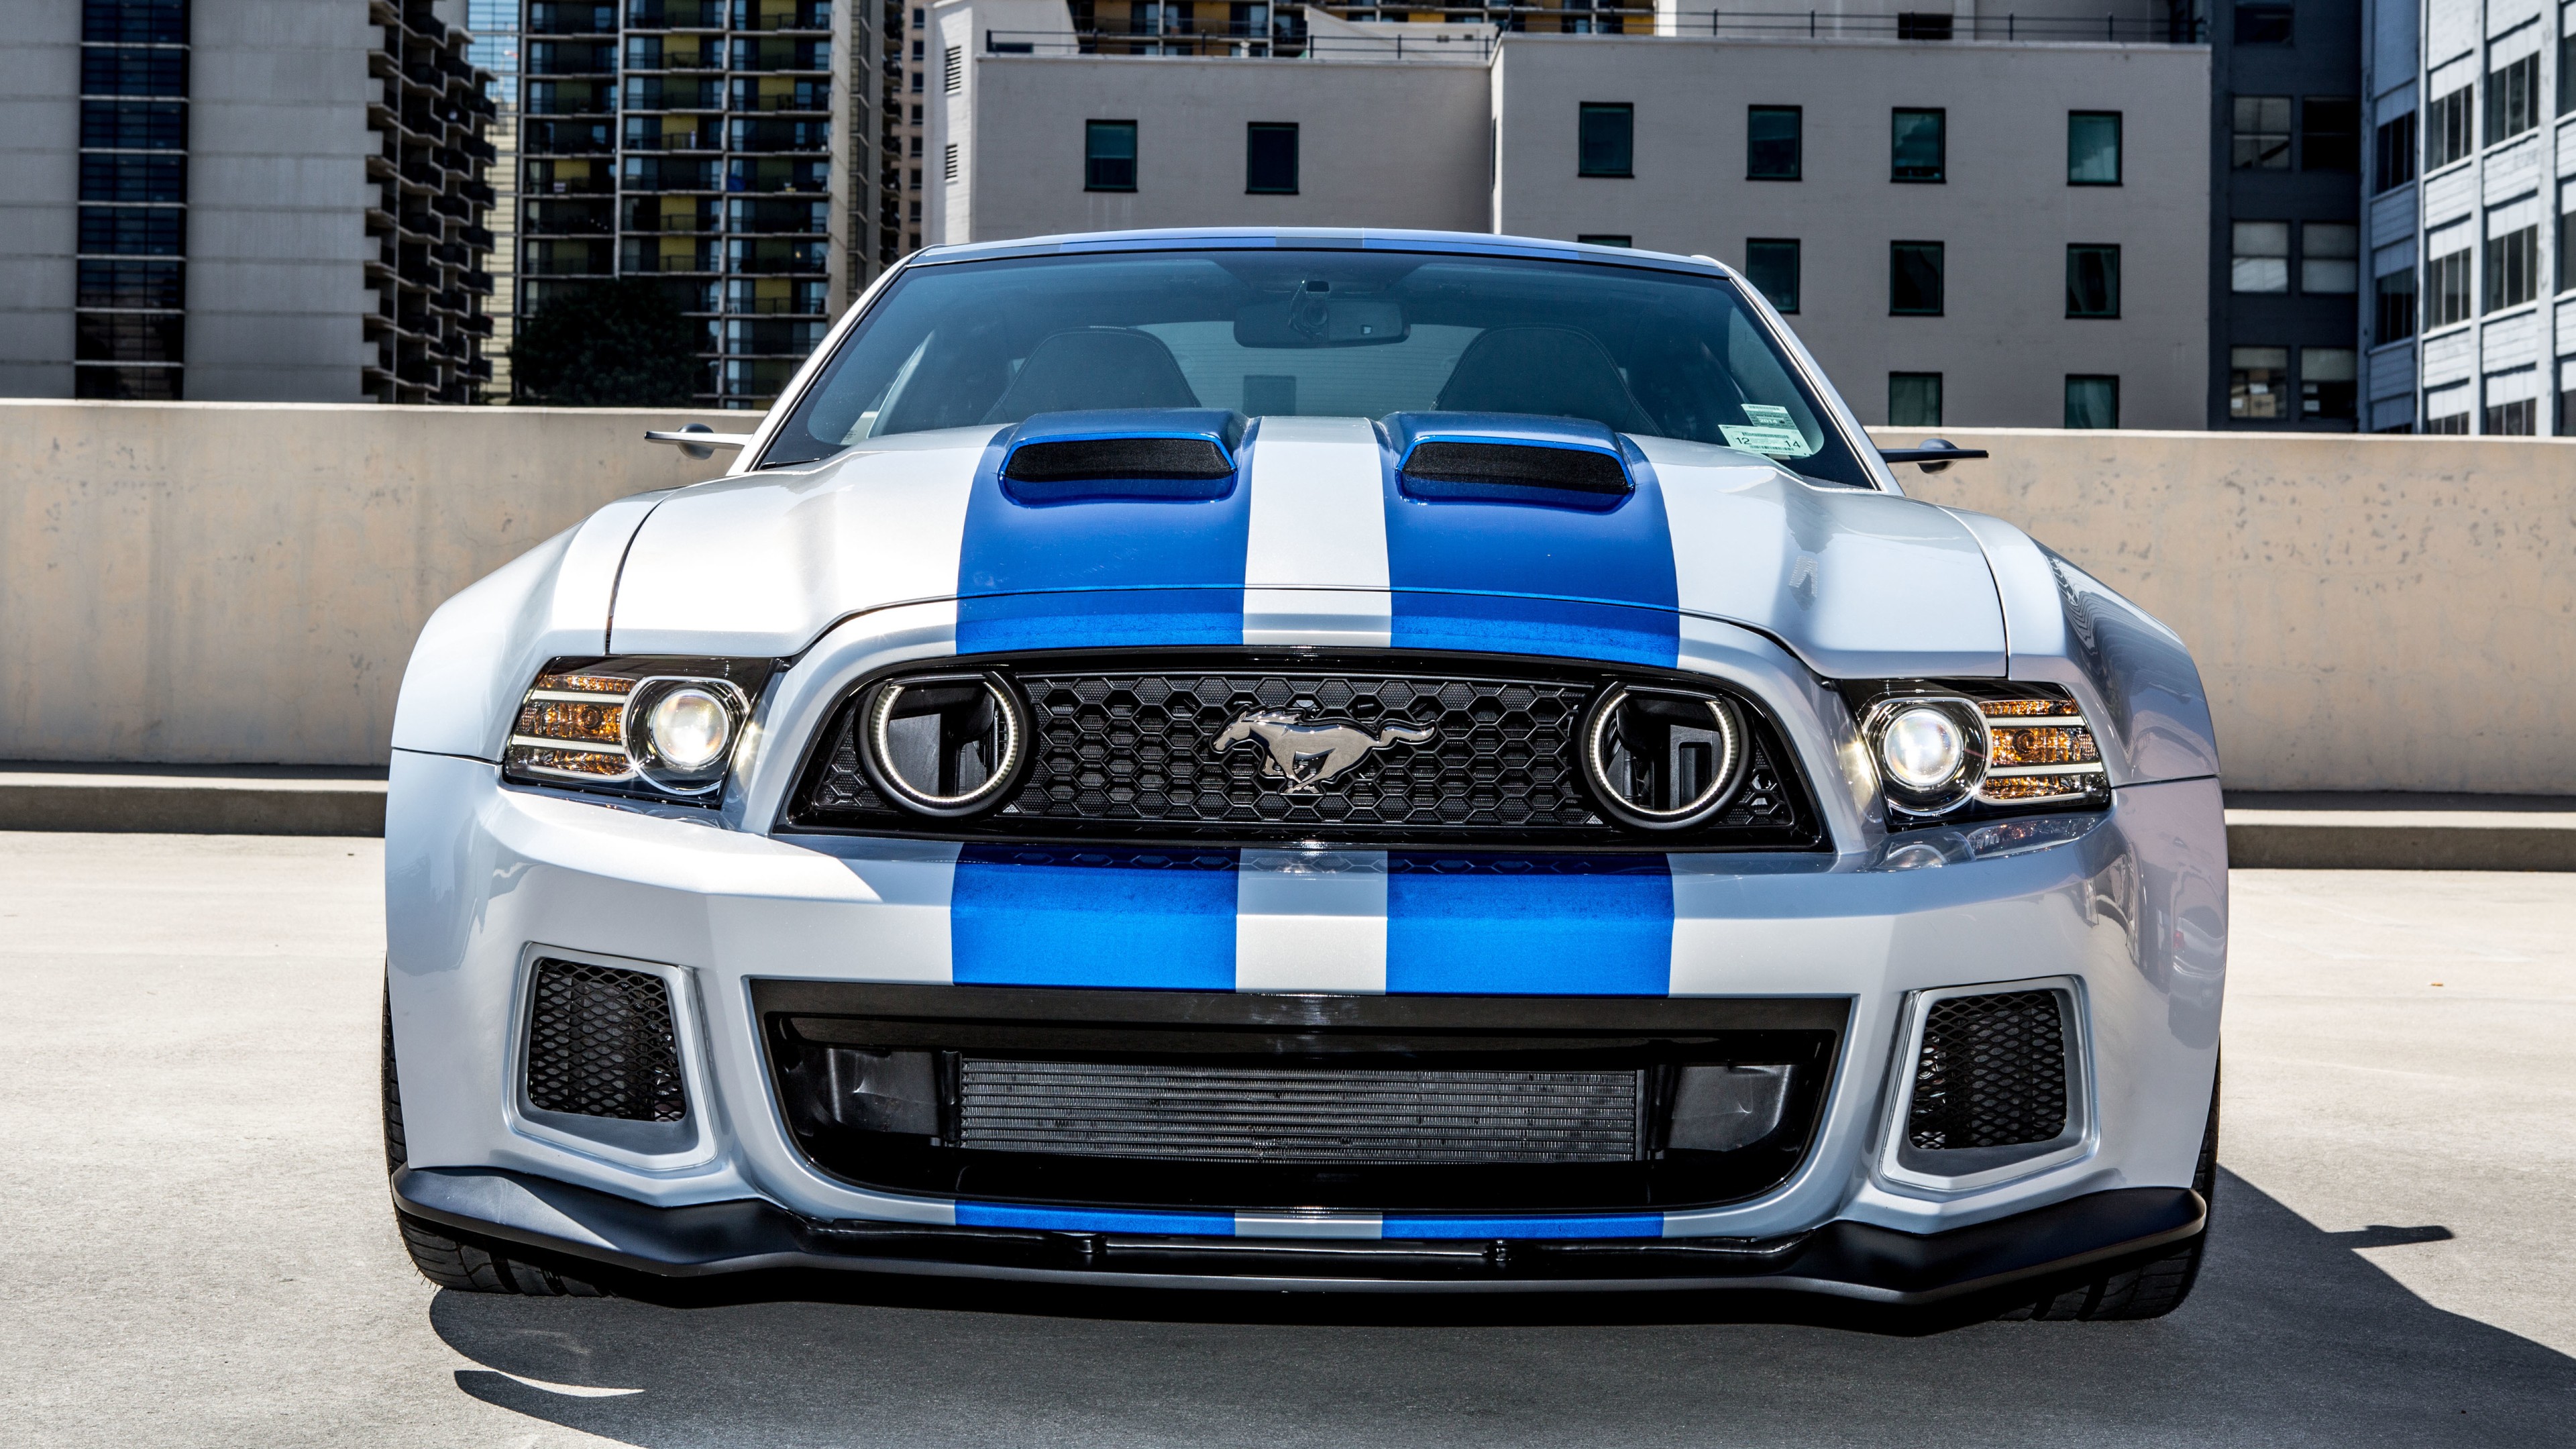 Ford Mustang Gt 5k Wallpaper Hd Car Wallpapers Id 7291 Images, Photos, Reviews